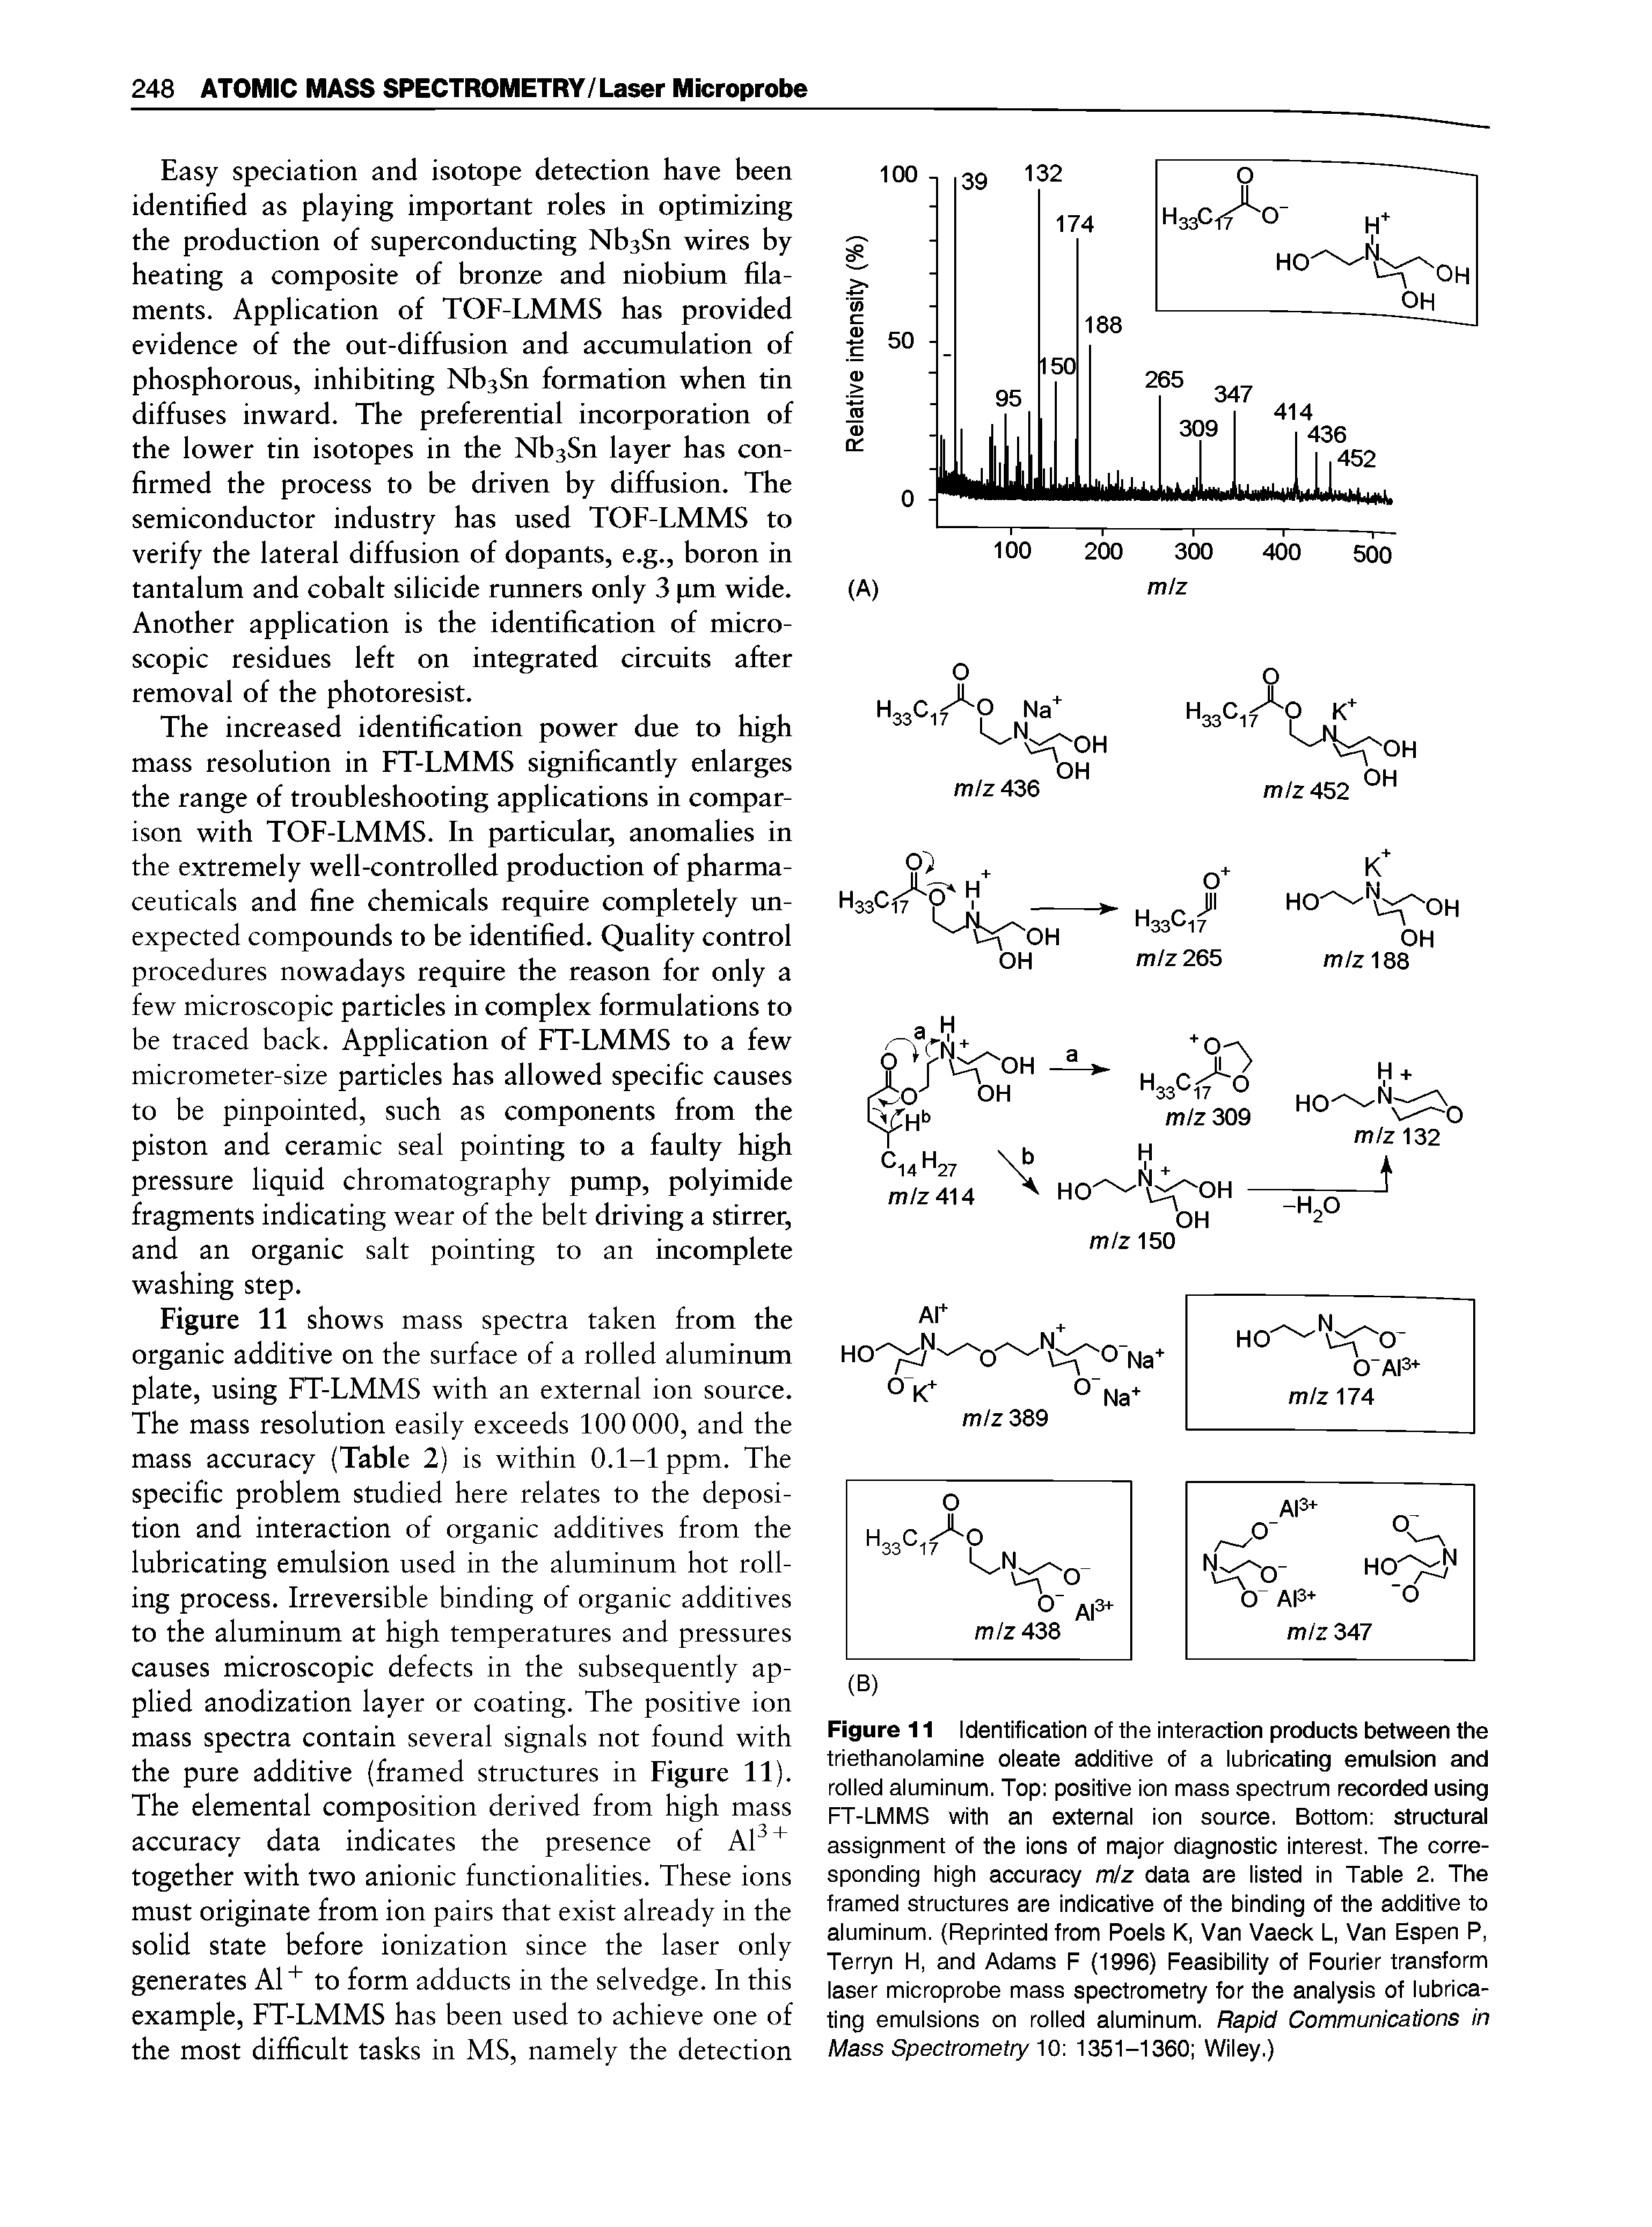 Figure 11 Identification of the interaction products between the triethanolamine oleate additive of a lubricating emulsion and rolled aluminum. Top positive ion mass spectrum recorded using FT-LMMS with an external ion source. Bottom structural assignment of the ions of major diagnostic interest. The corresponding high accuracy miz data are listed in Table 2. The framed structures are indicative of the binding of the additive to aluminum. (Reprinted from Poels K, Van Vaeck L, Van Espen P, Terryn H, and Adams F (1996) Feasibility of Fourier transform laser microprobe mass spectrometry for the analysis of lubricating emulsions on rolled aluminum. Rapid Communications in Mass Spectrometry W 1351-1360 Wiley.)...